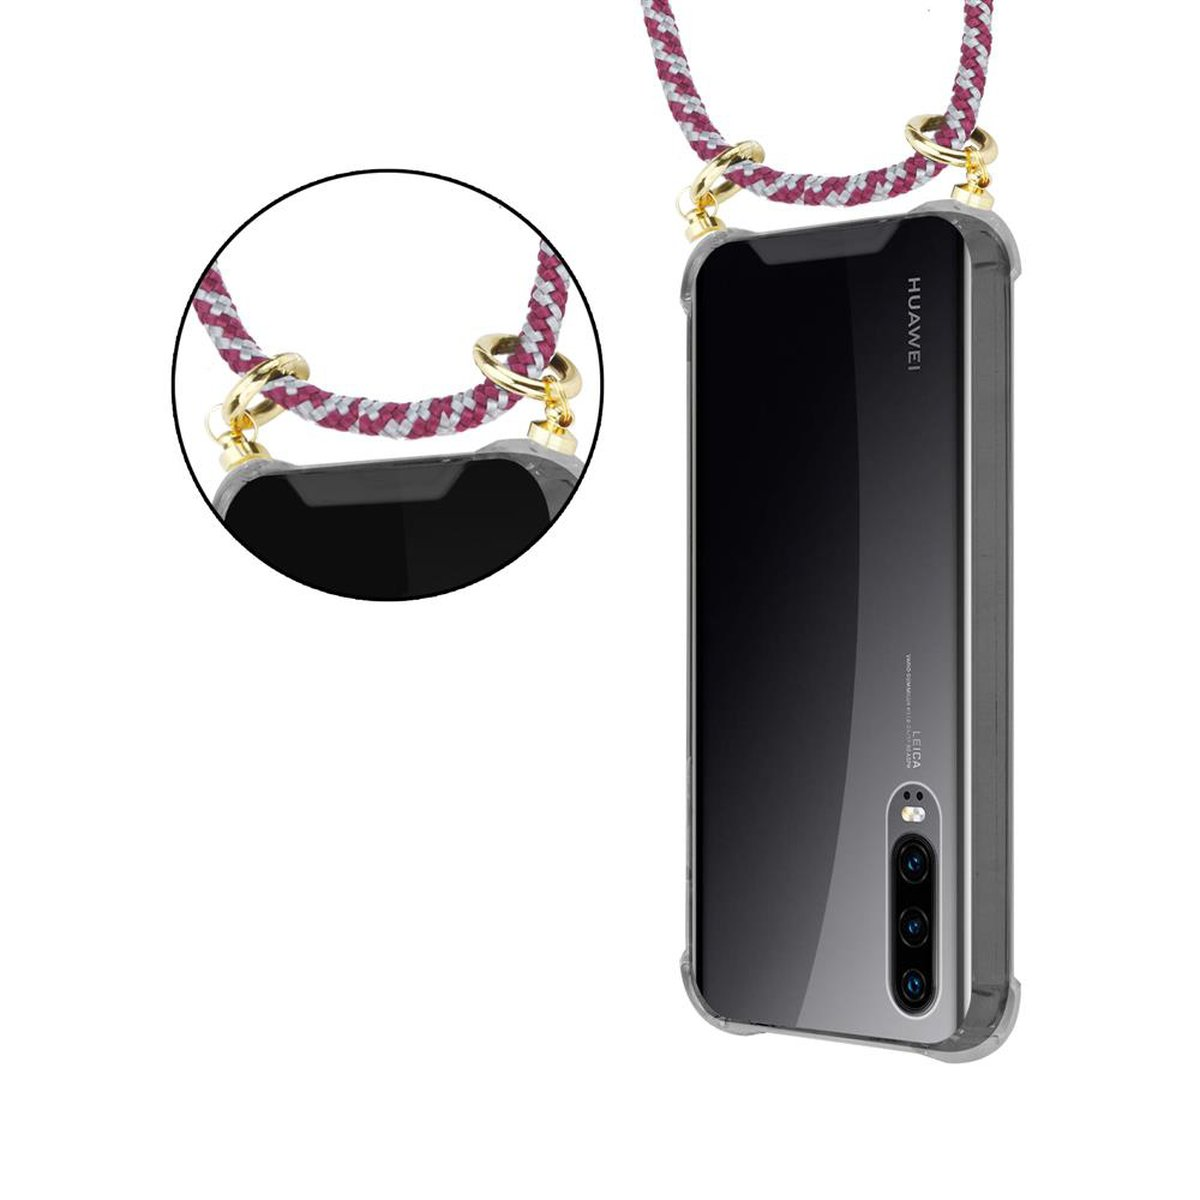 CADORABO Handy Kette mit Gold Huawei, Hülle, und Ringen, Kordel P30, abnehmbarer ROT Band WEIß Backcover